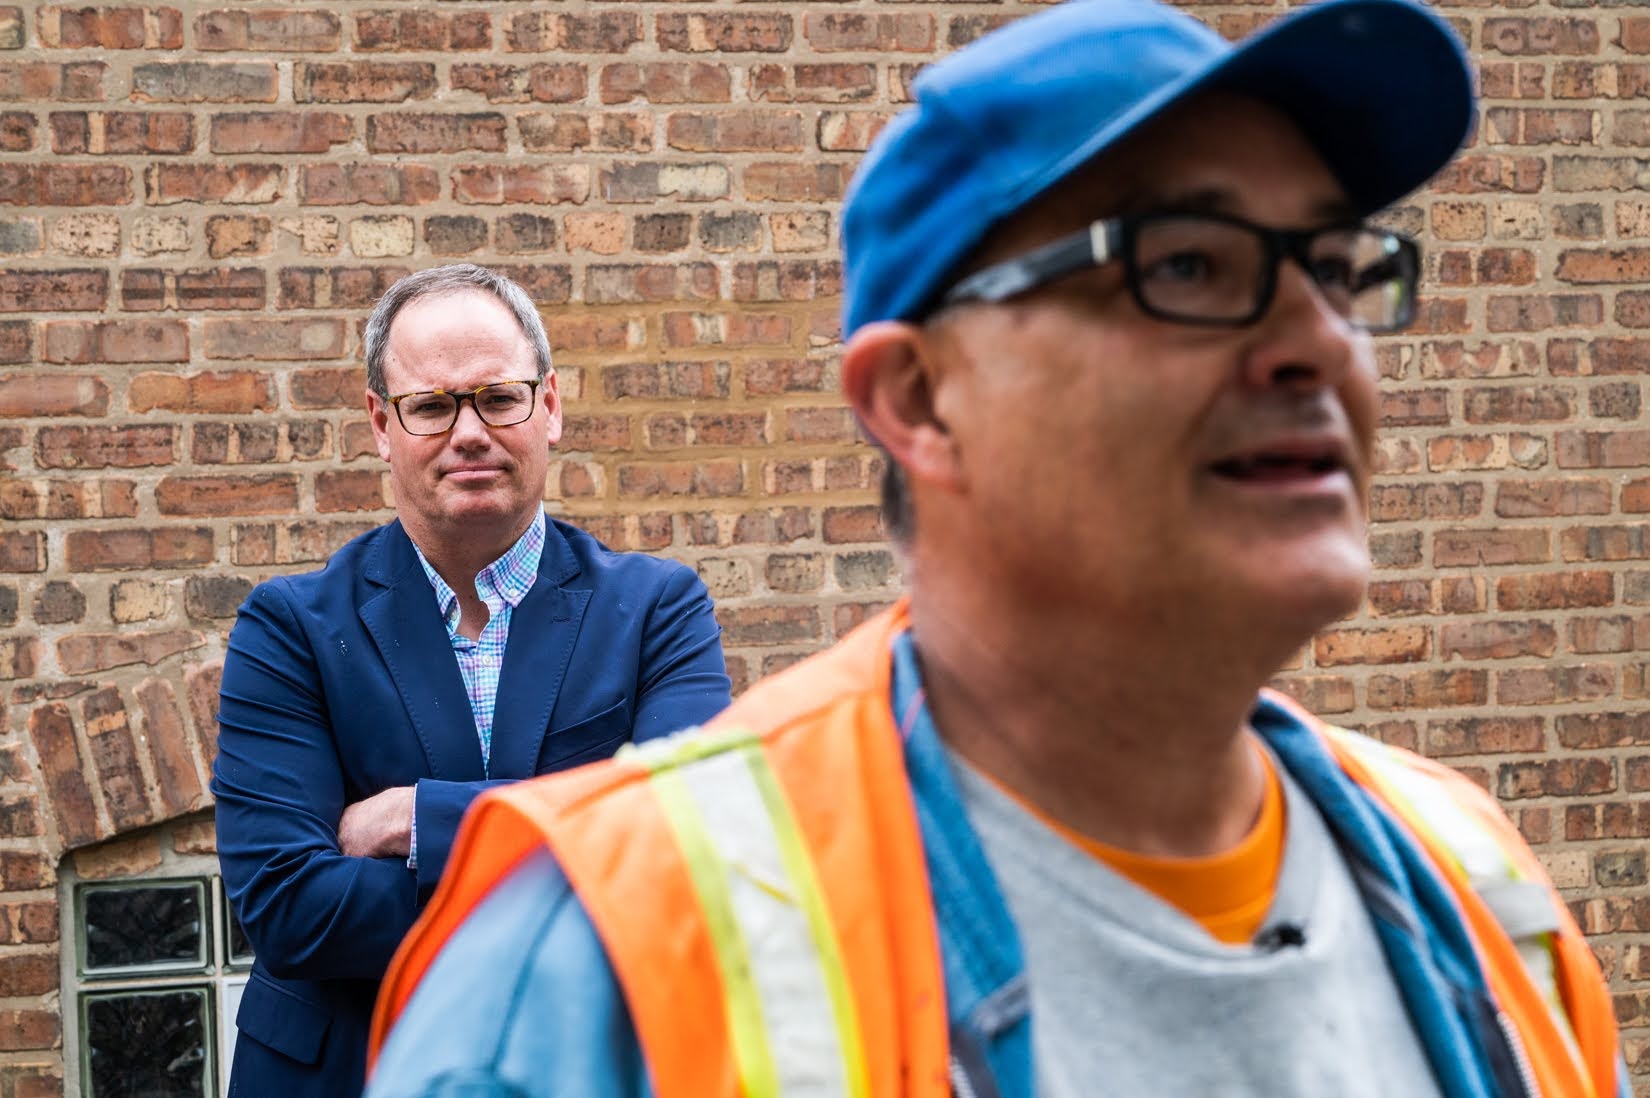 Ald. Marty Quinn (13th) looks on as ward assistant Isidro Rosado talks about his rat abatement work near a Chrysler Village row home on May 19. (Credit: Colin Boyle/Block Club Chicago)
